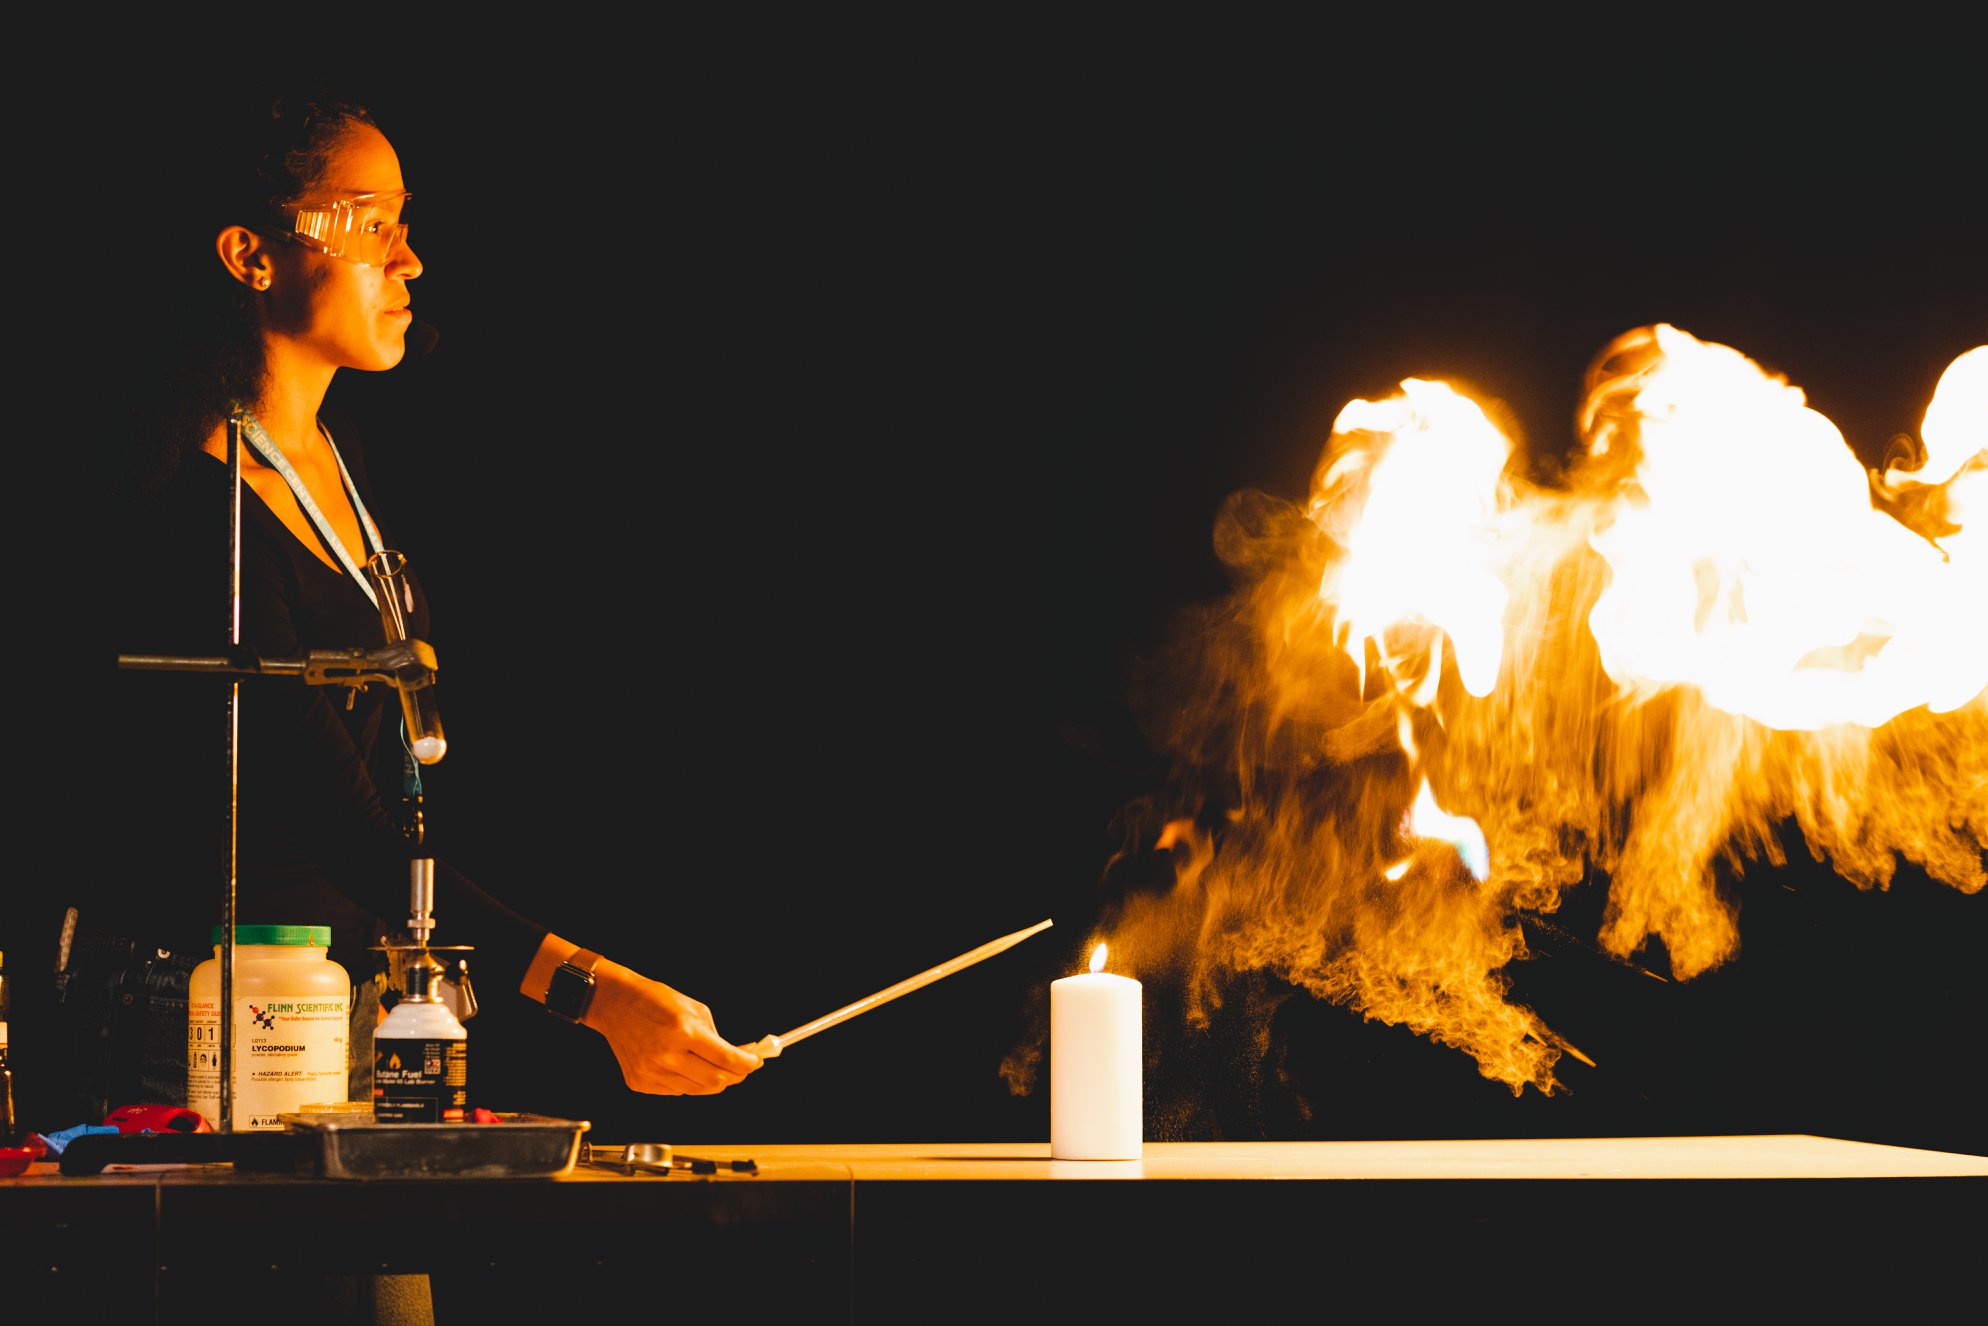 Fiery experiment at the Show of Ice and Fire